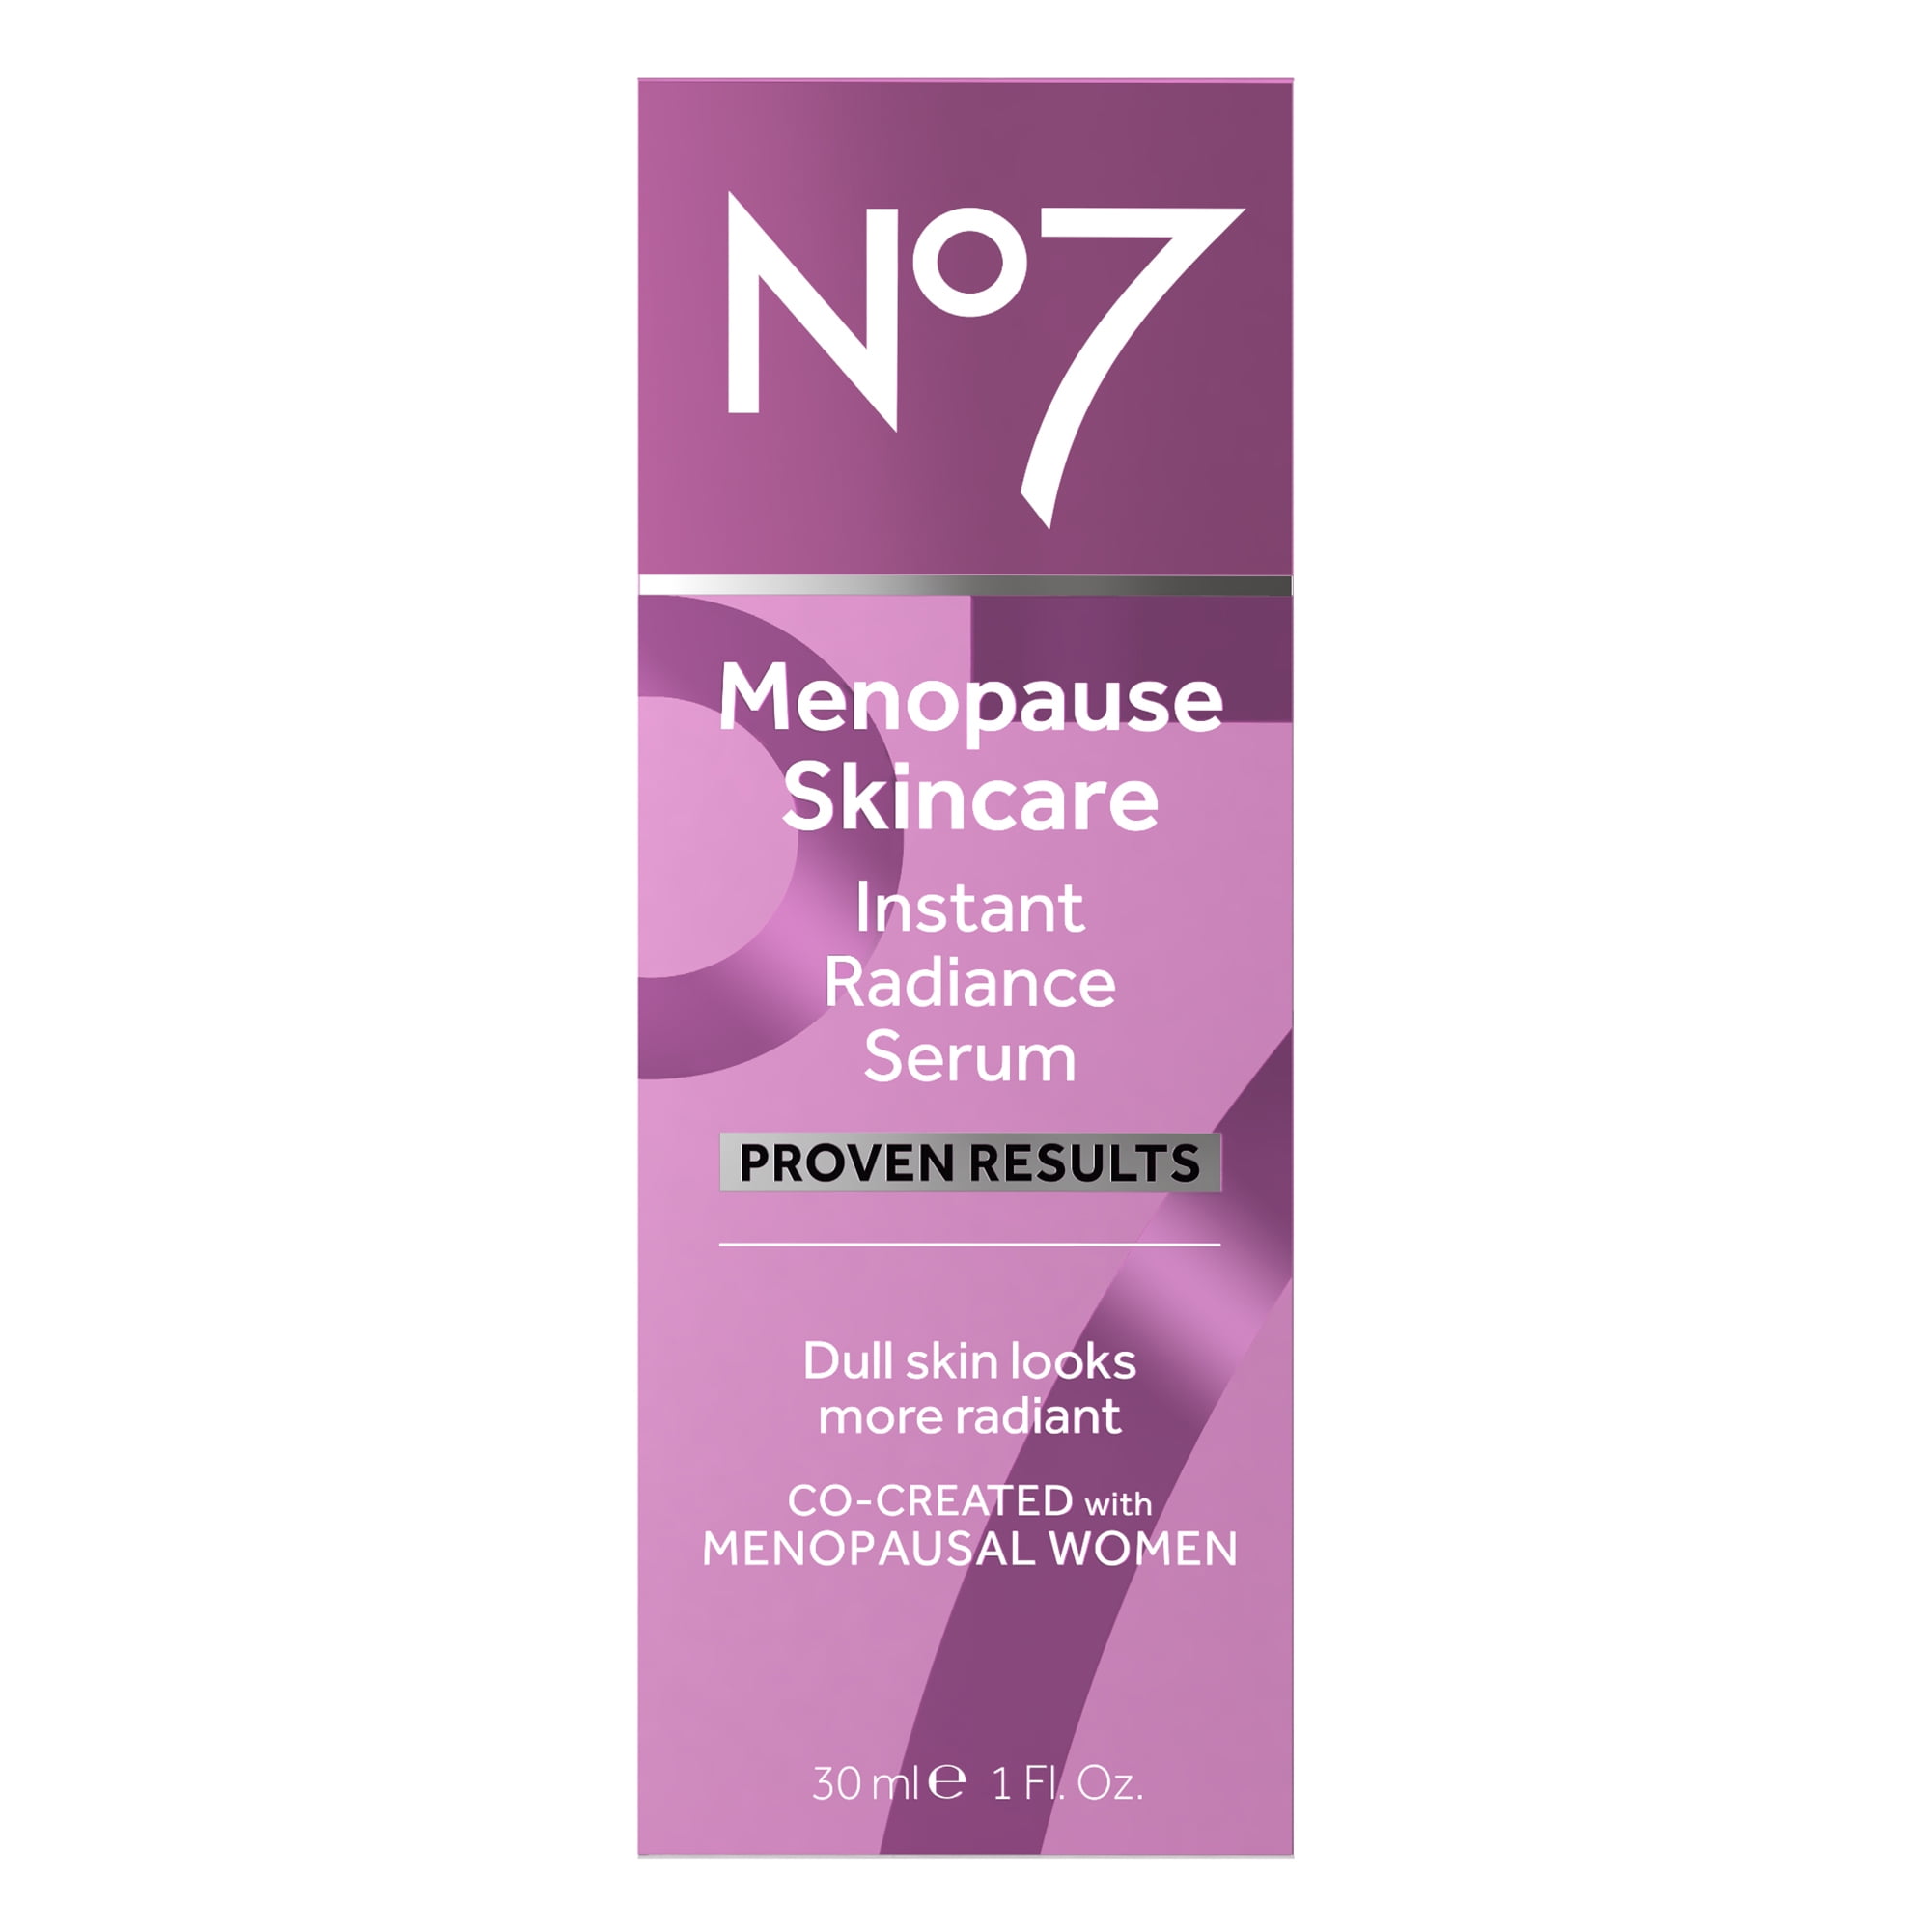 No7 Menopause Skincare Instant Radiance Serum with Collagen Peptides,  Hyaluronic Acid & Lipids, 1 oz